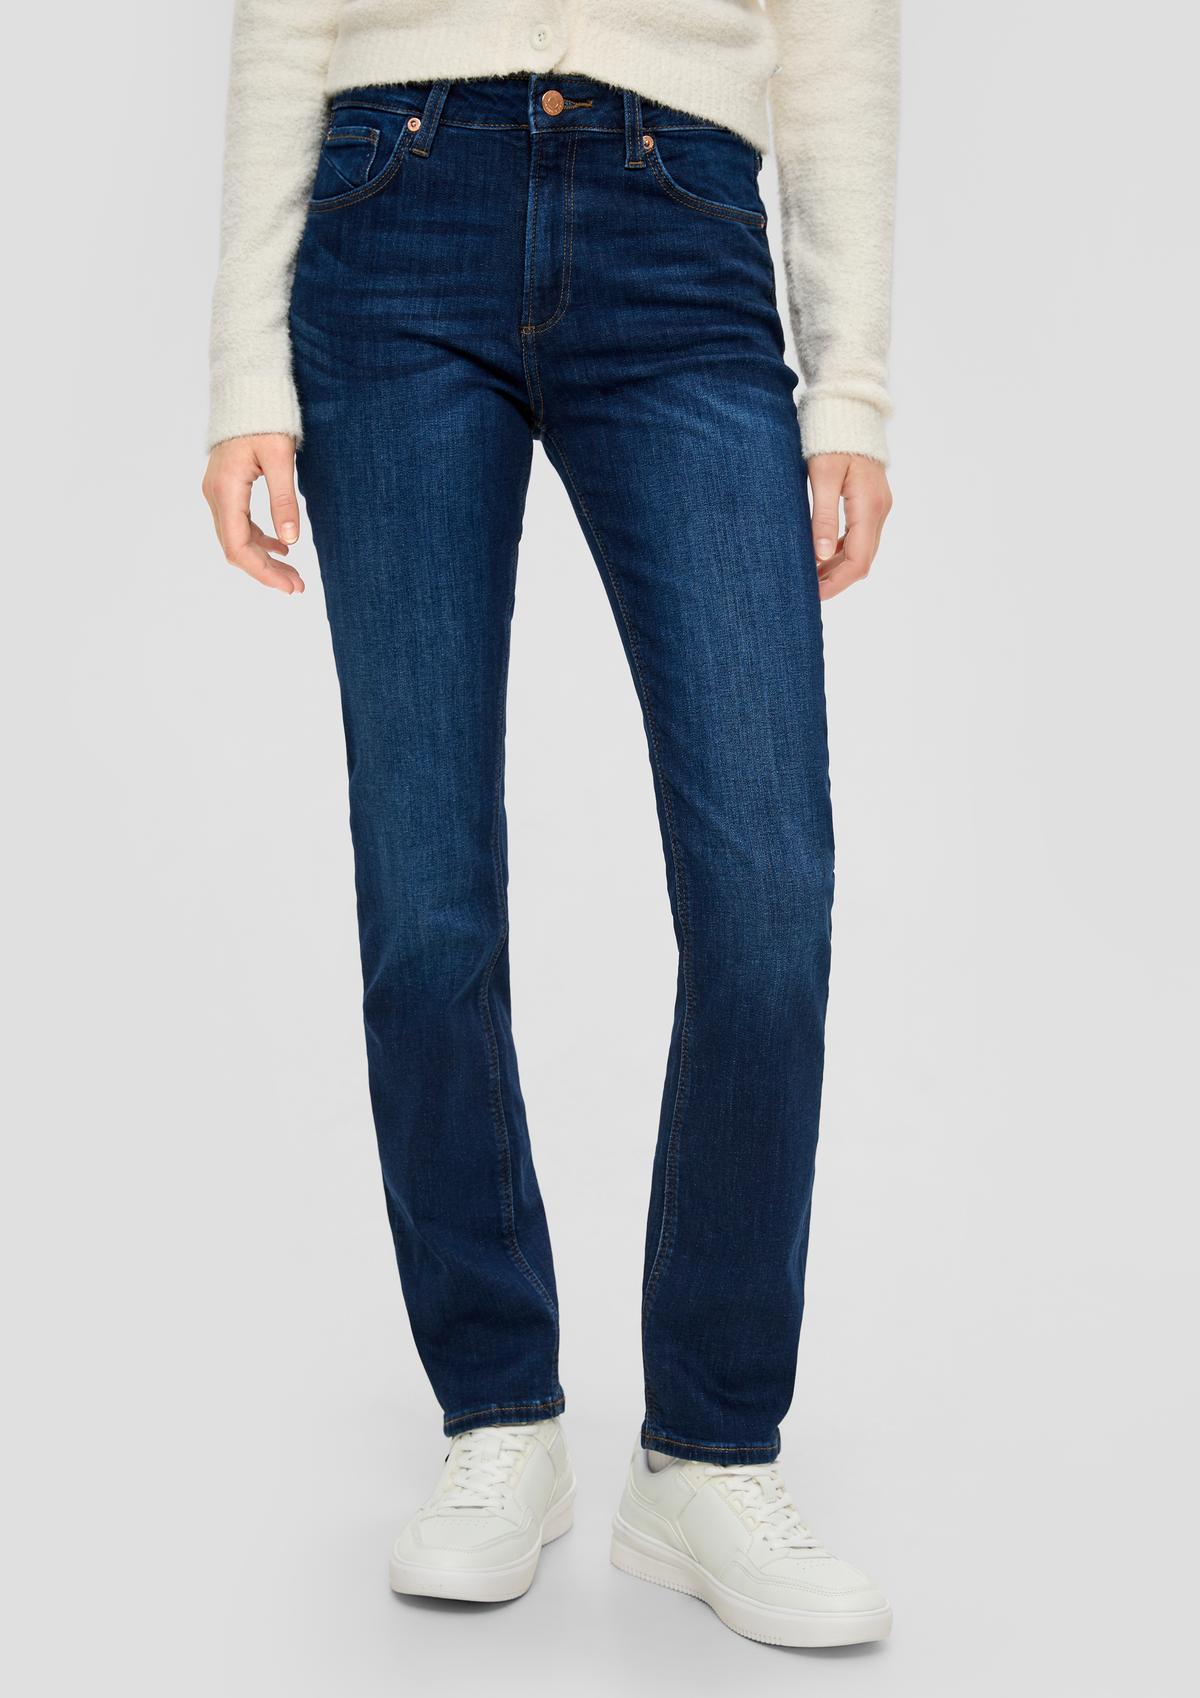 s.Oliver Jeans Catie / Slim Fit / High Rise / Straight Leg